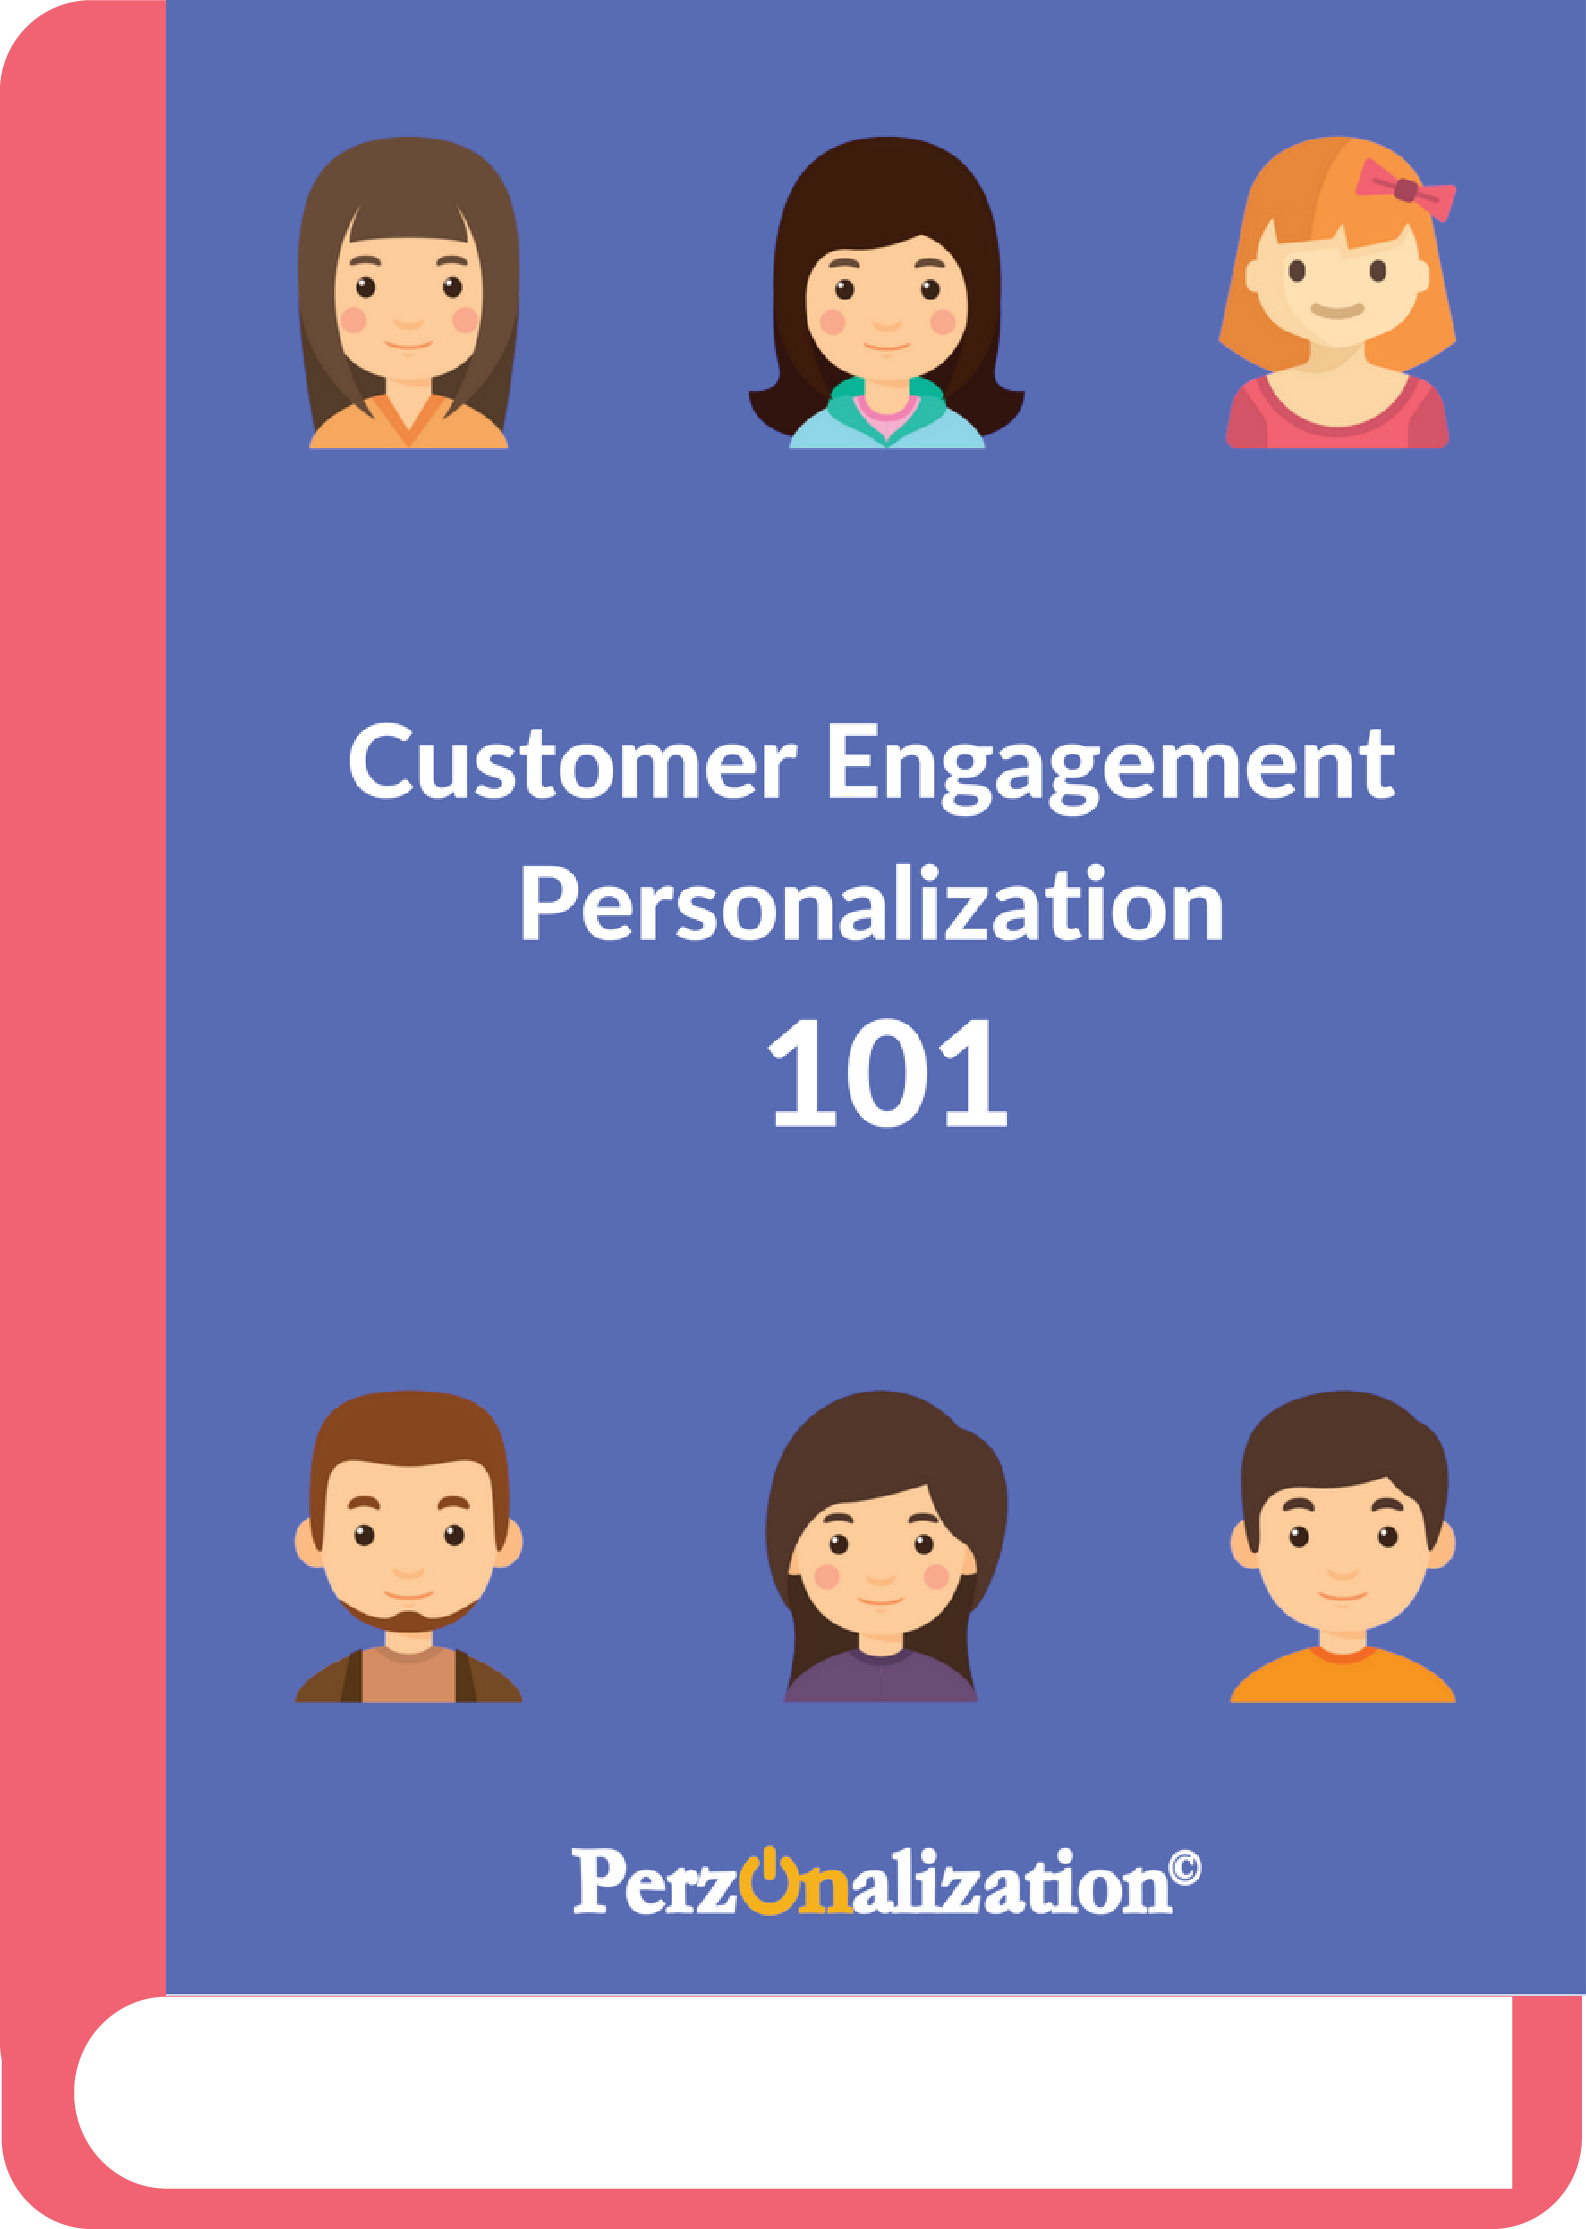 Customer Engagement Is eCommerce's Key Performance Indicator And Investing On Personalization Is a Great Way To Drive Engagement and Customer Loyalty. Find out more on this free eBook!